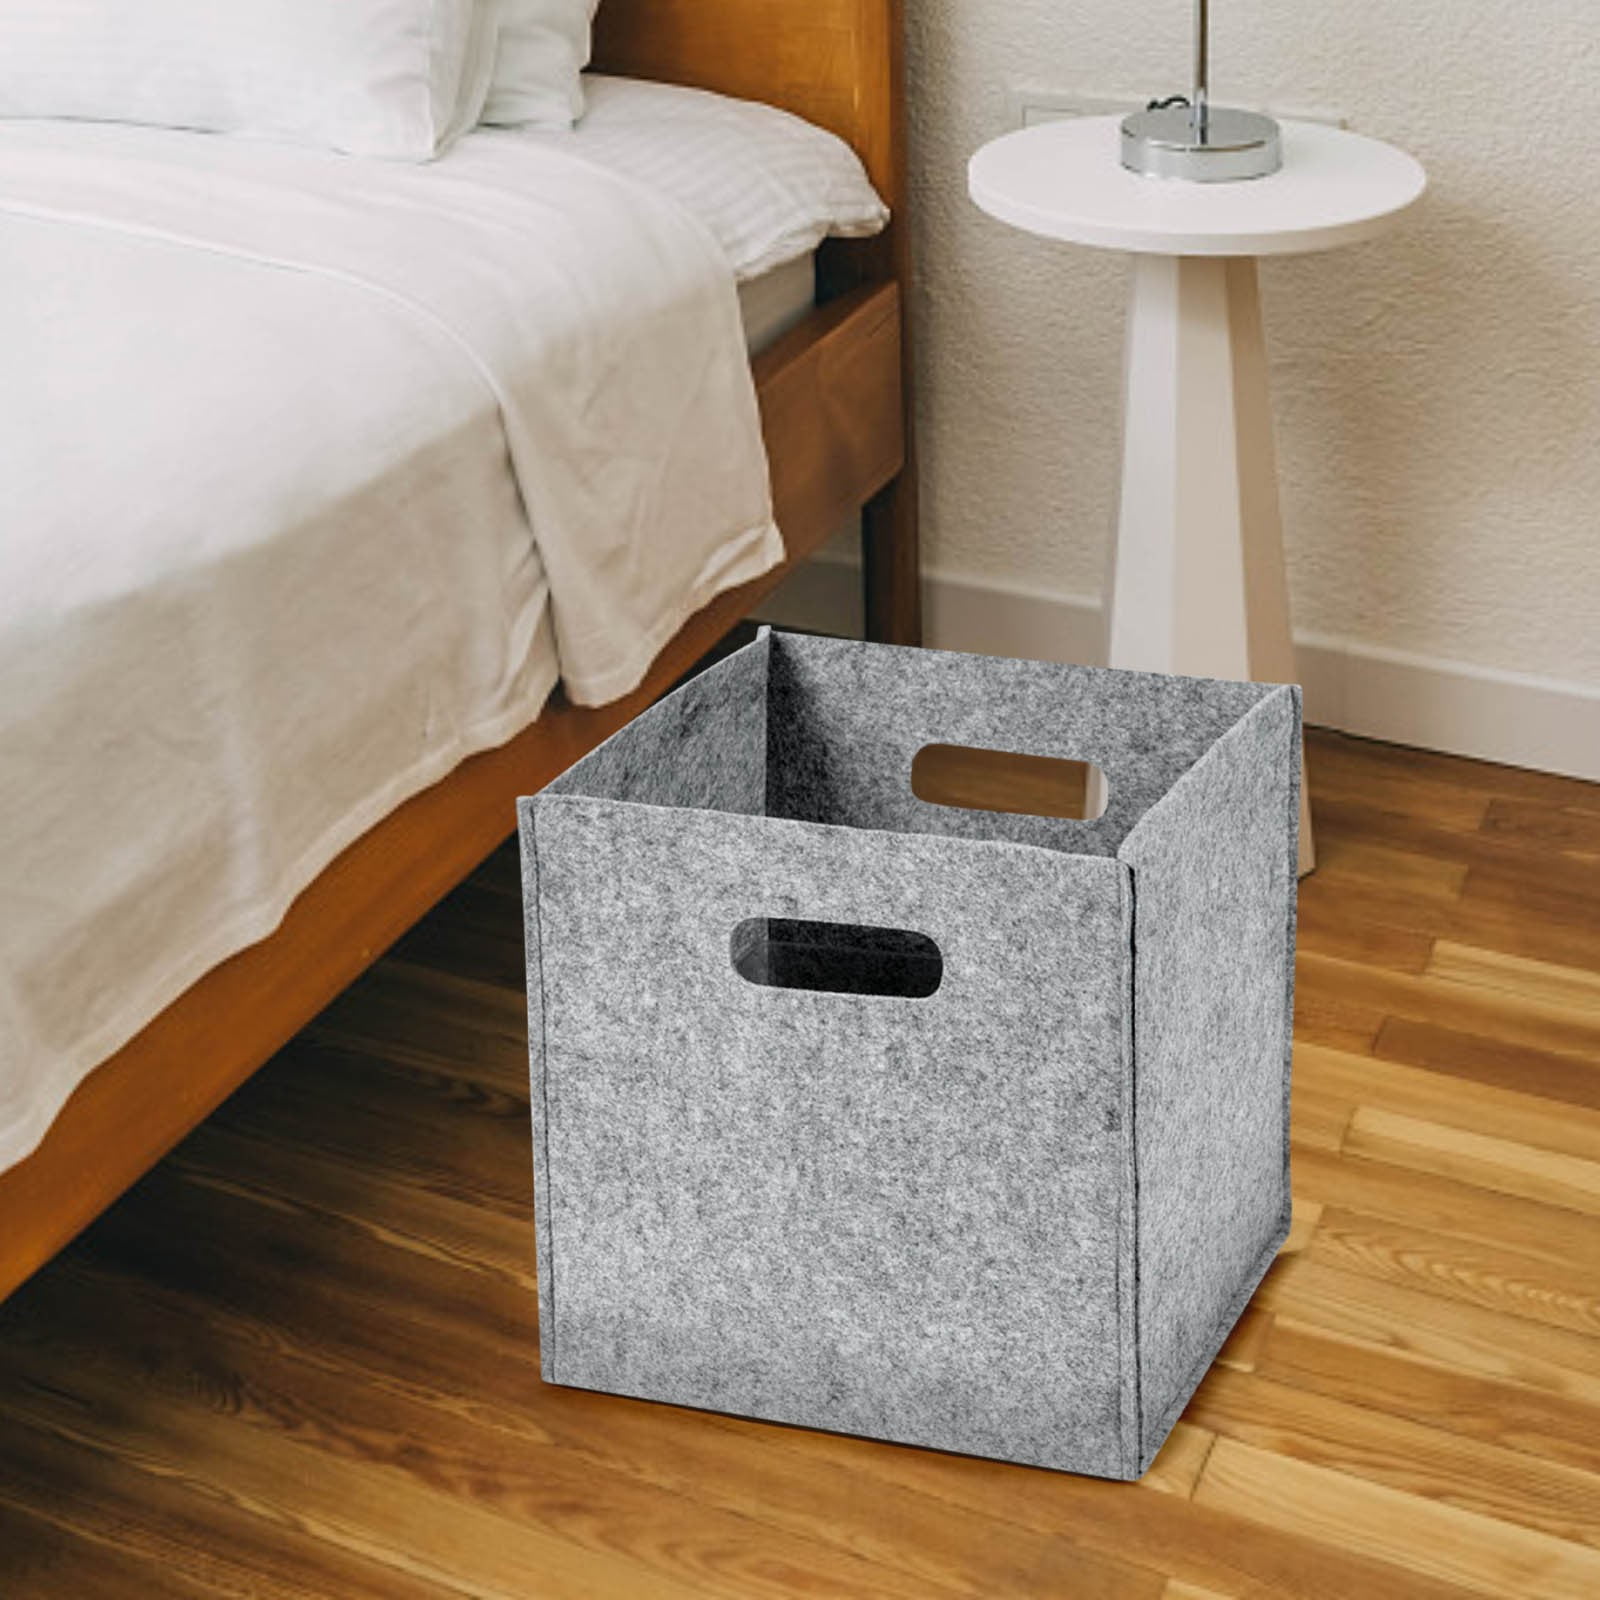  Valease Linen Fabric Collapsible Storage Bins with Removable  Lids and Handles, Washable Storage Box Containers Baskets Cube with Cover  for Bedroom,Closet,Office,Living Room,Nursery (Grey, Medium) : Home &  Kitchen